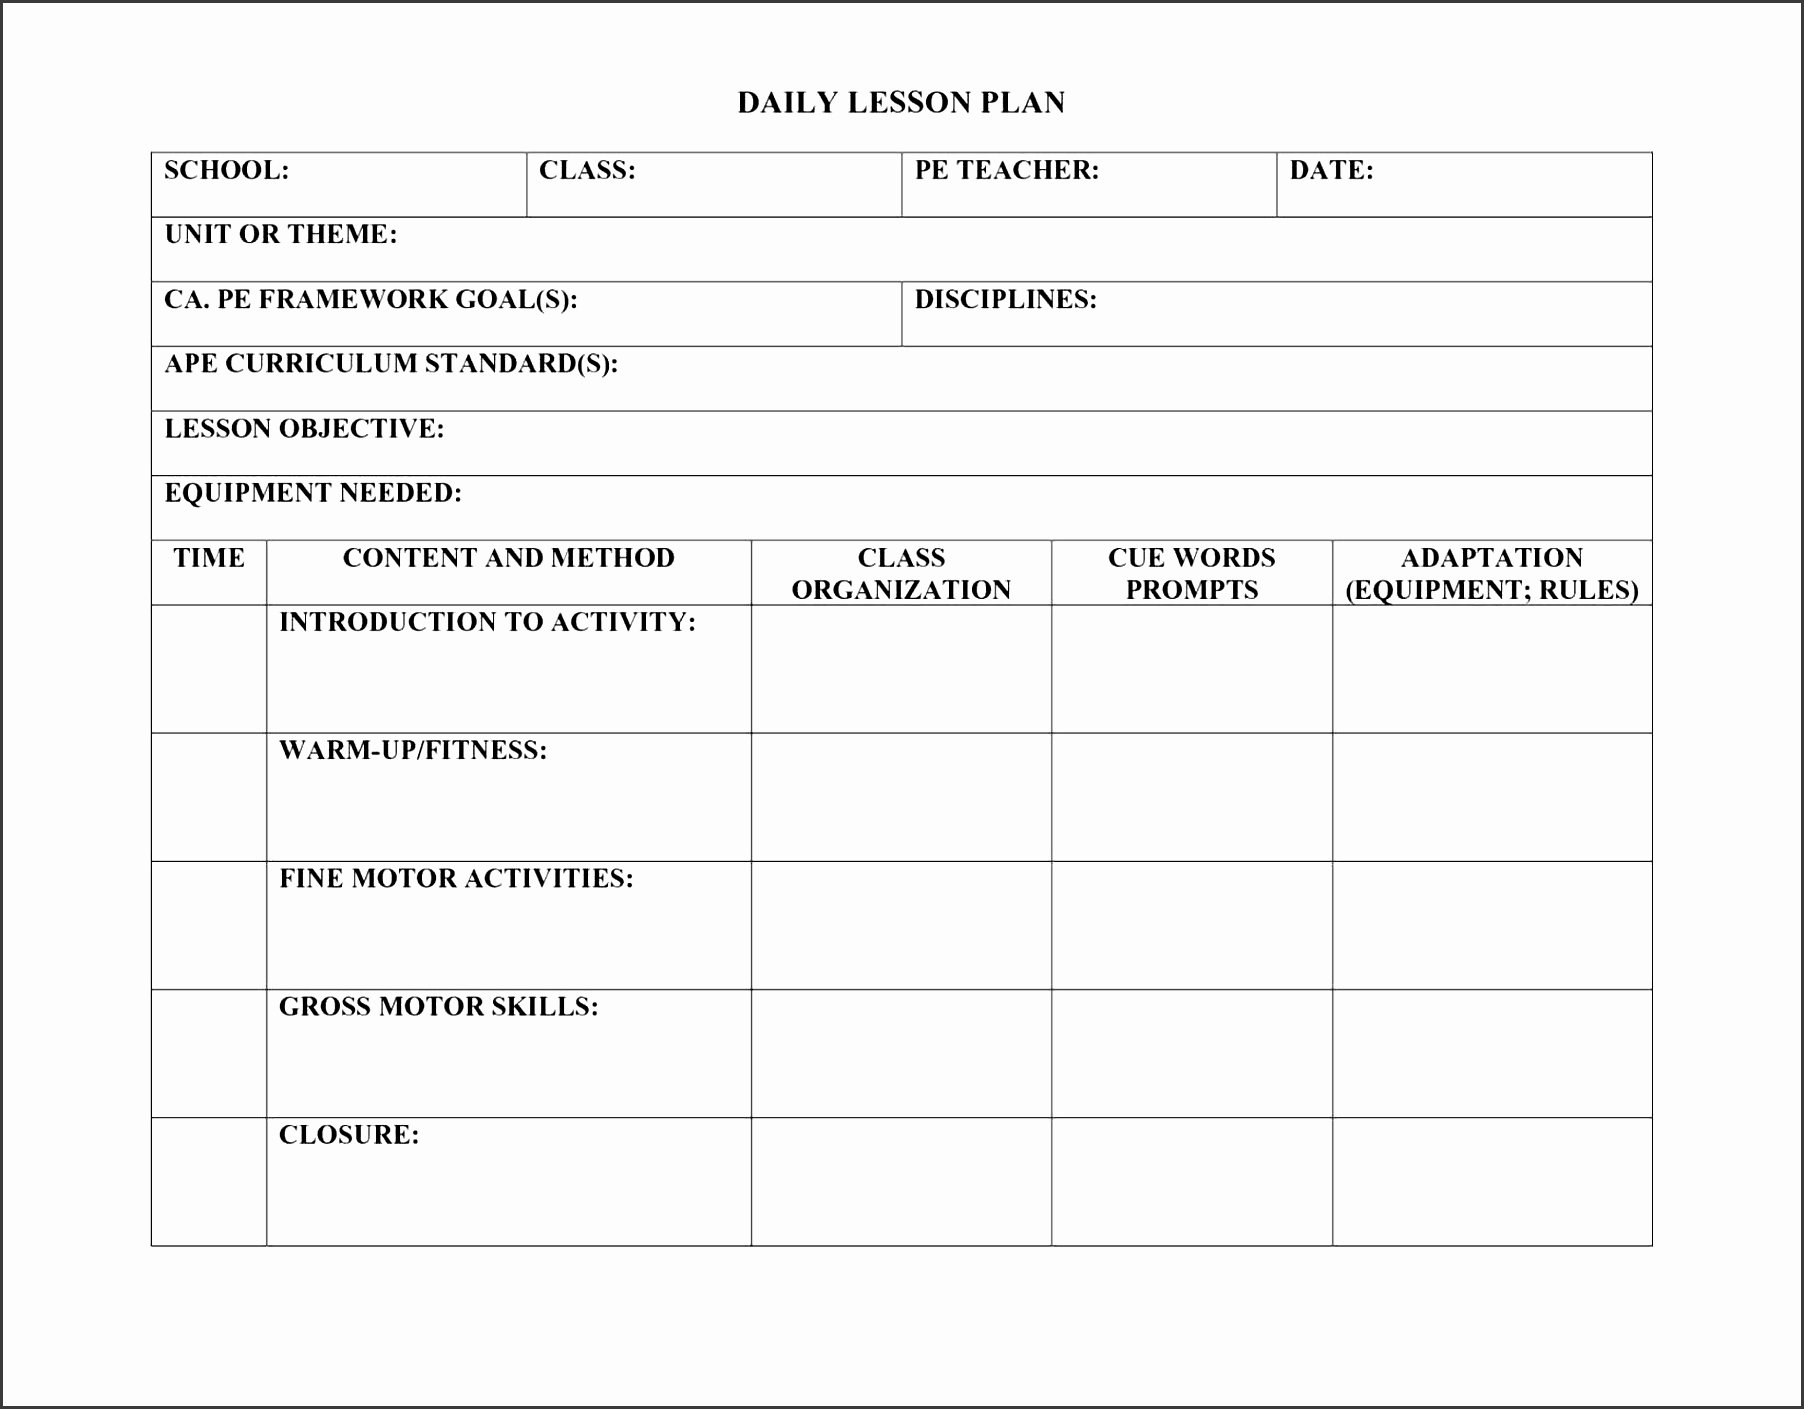 Daily Lesson Plan Template Doc Inspirational 5 Daily Lesson Planner for Free Sampletemplatess